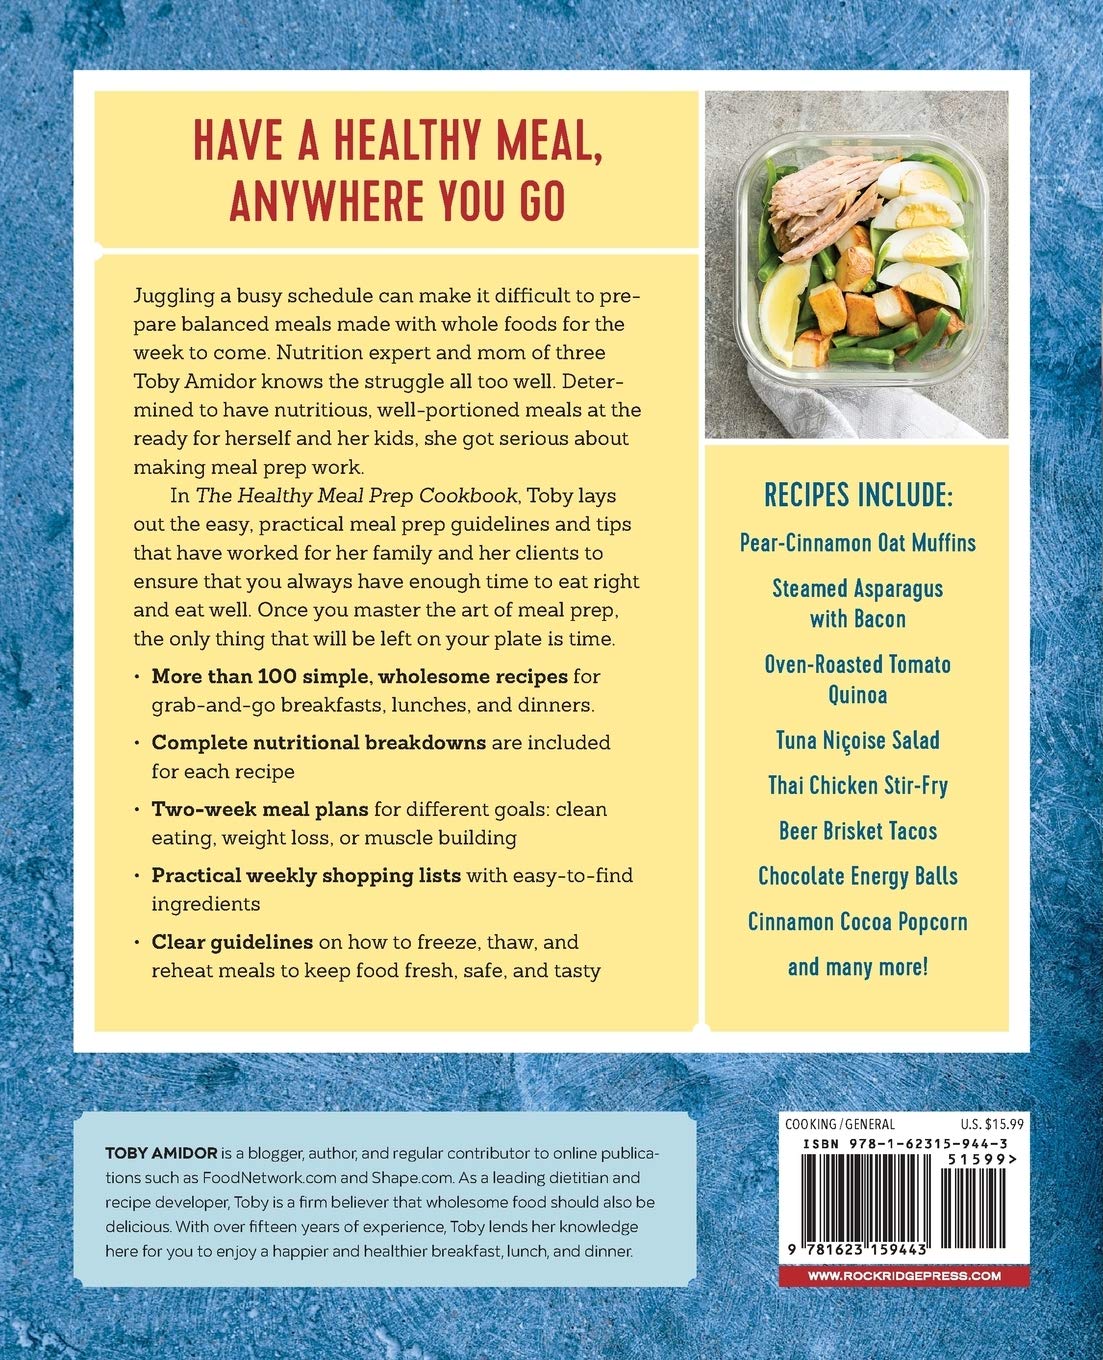 Back cover of The Healthy Meal Prep Cookbook